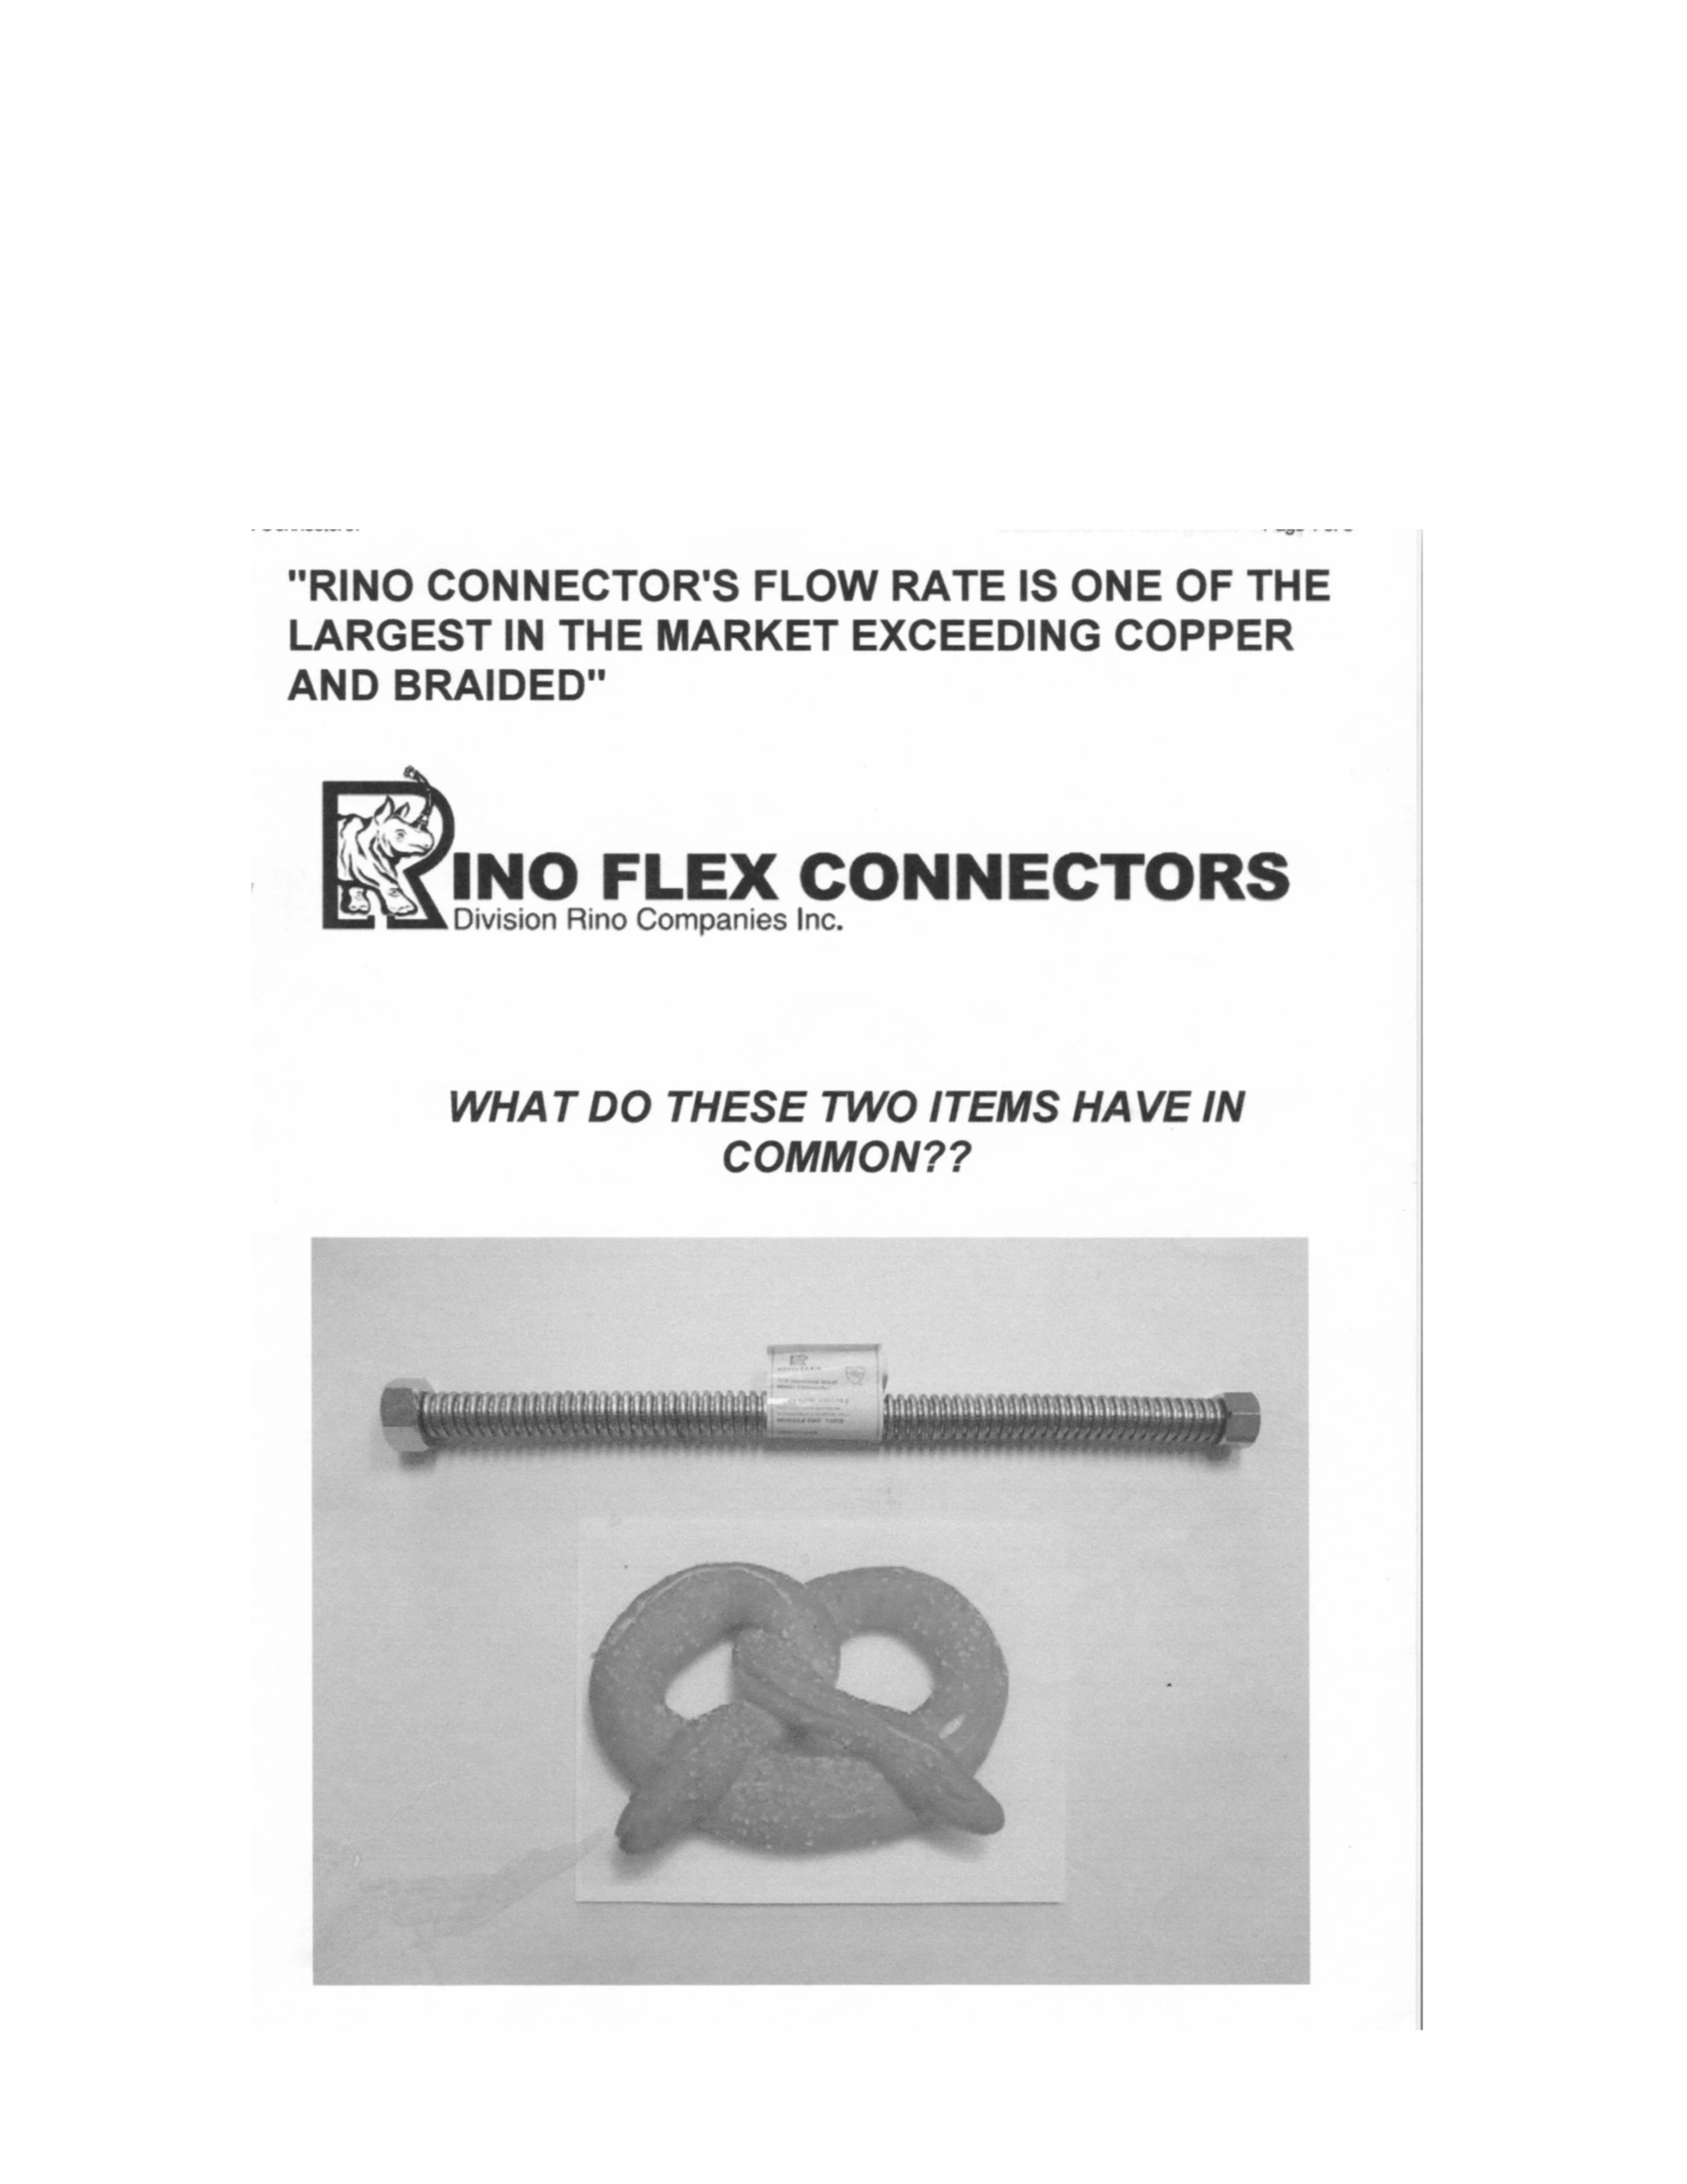 Rinoflex is so flexible, it can be knotted into a pretzel shape. 